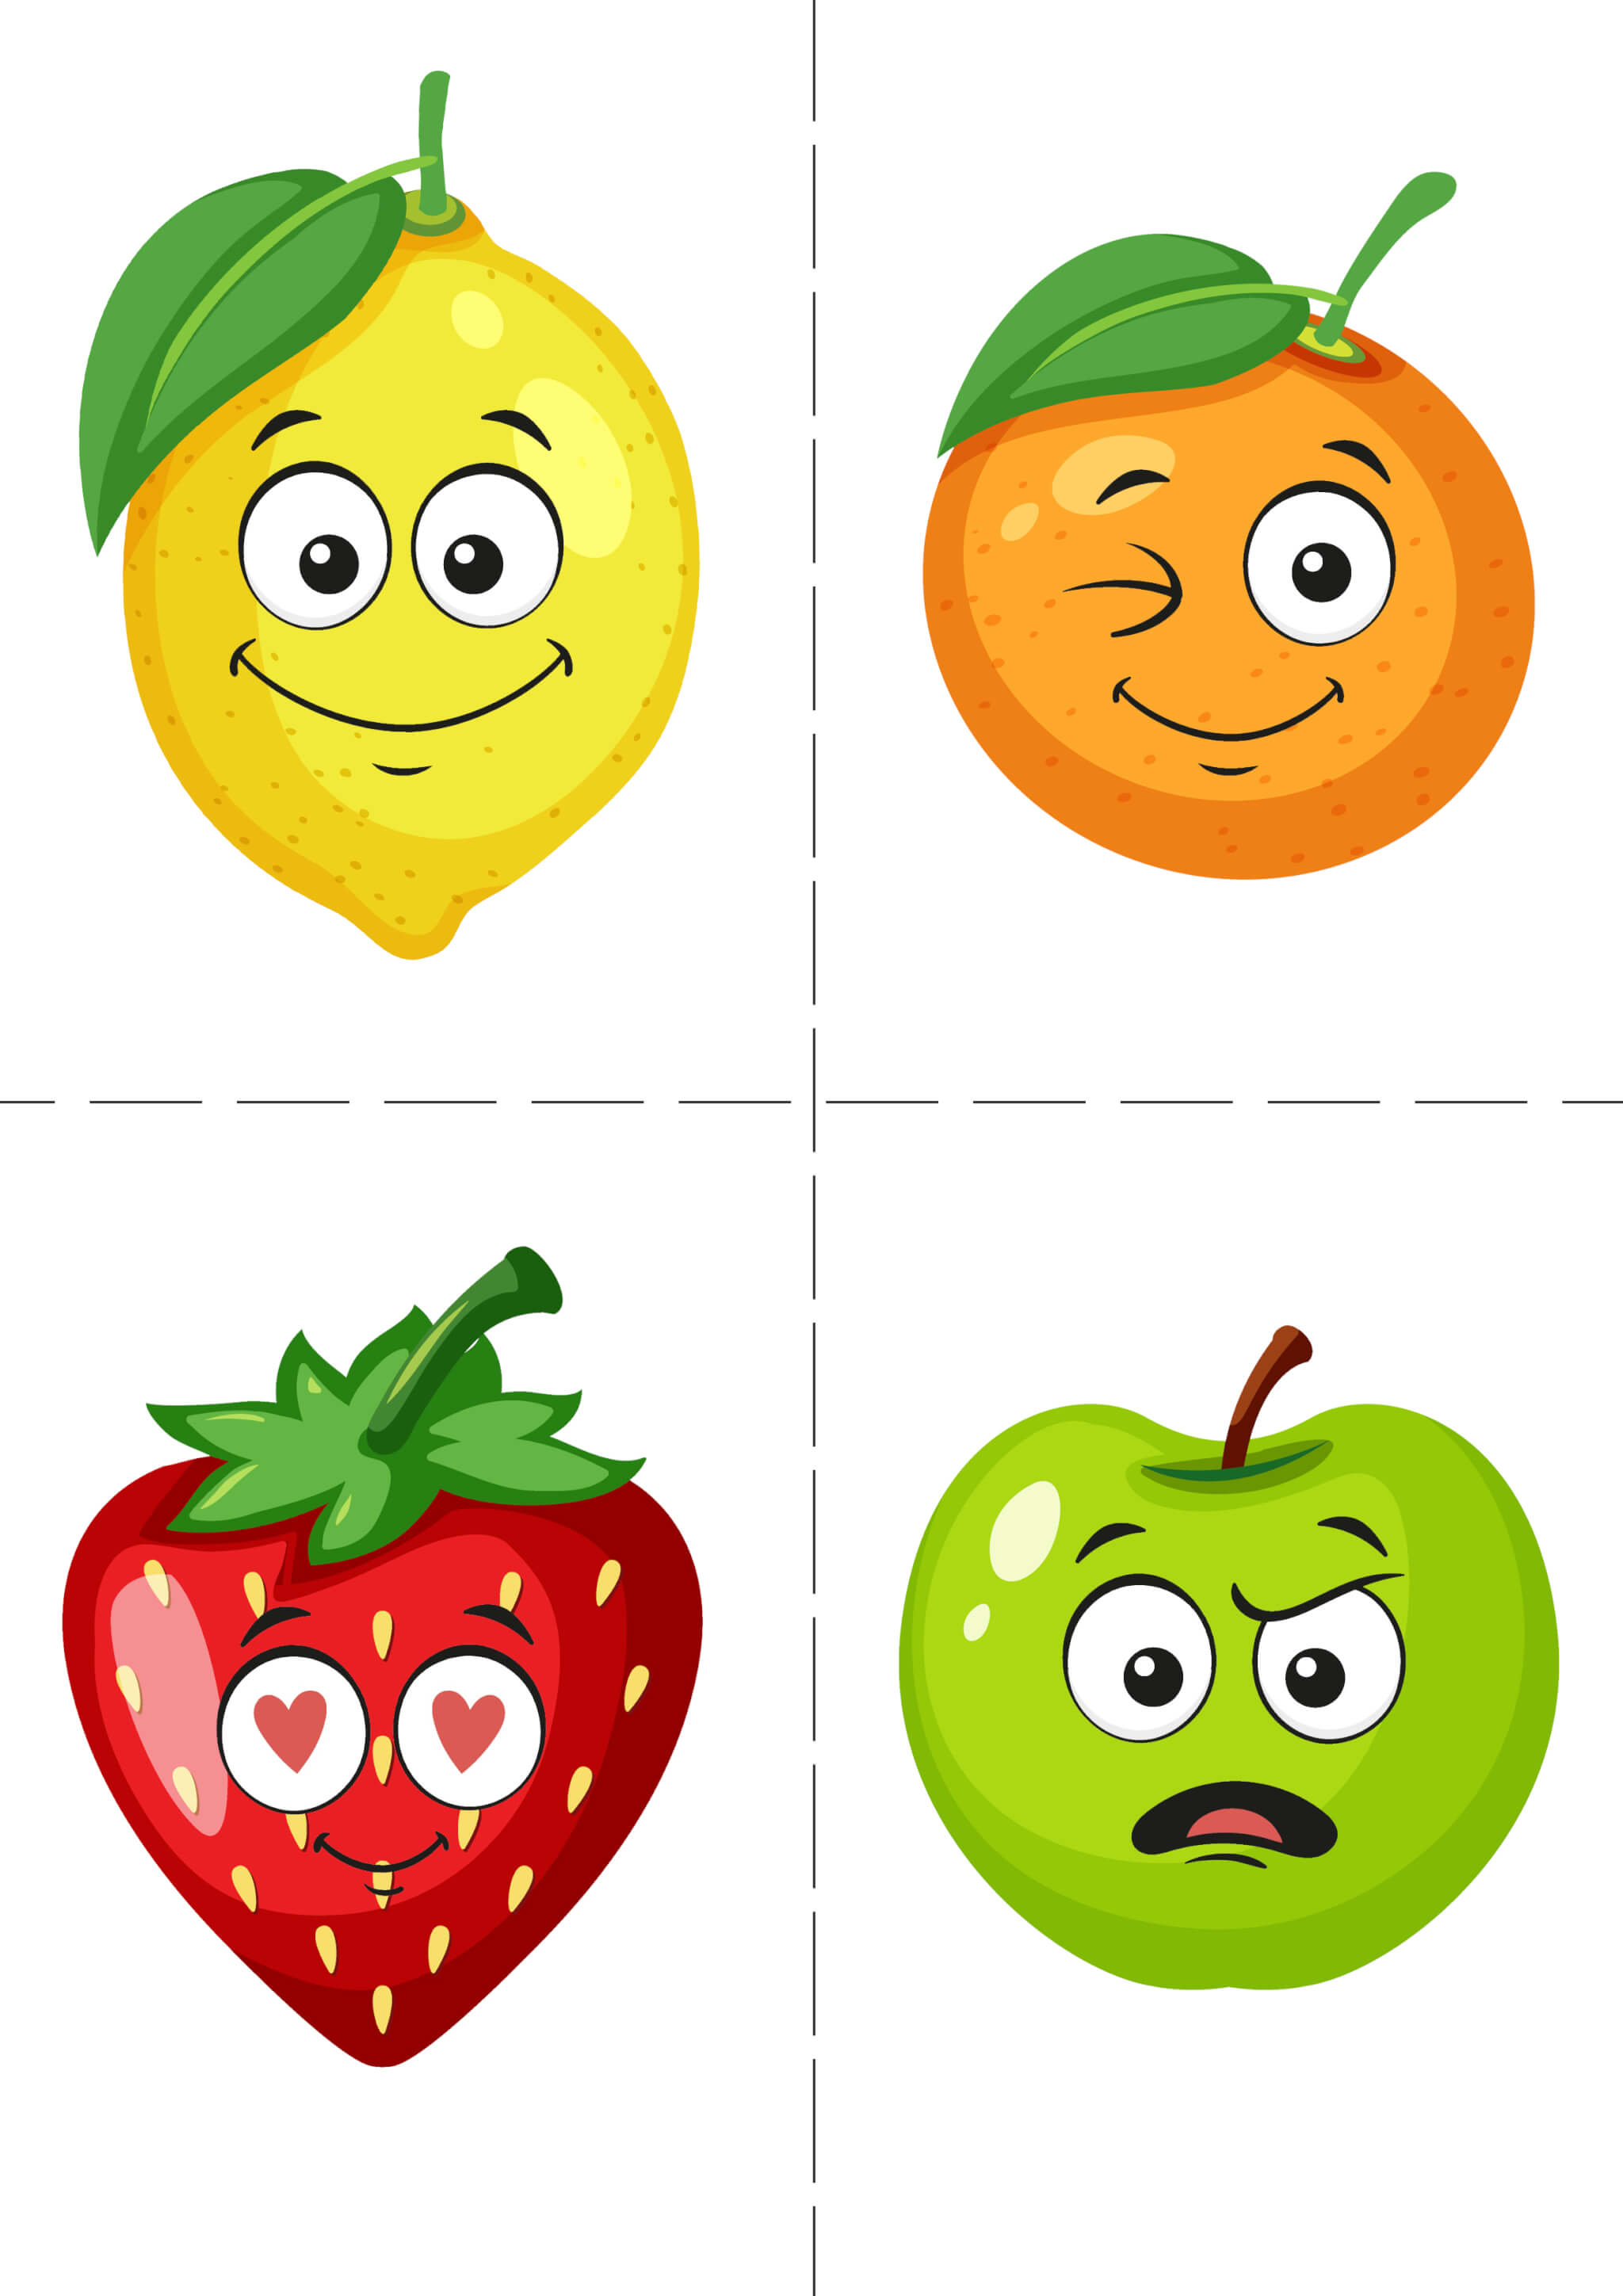 Fruits and Vegetables Emotions Flashcards - Image 2